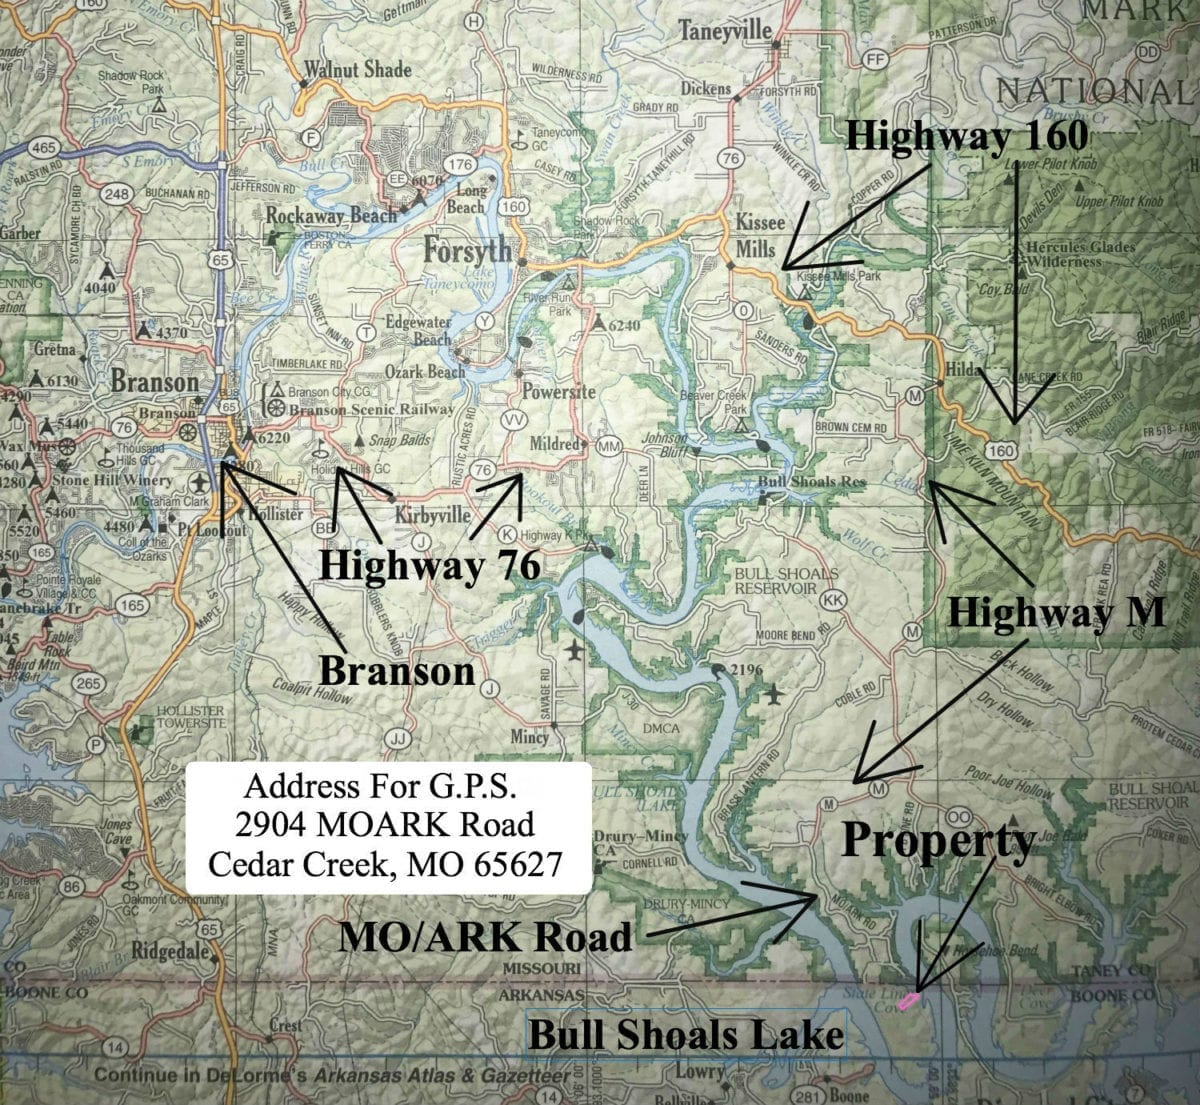 Road map to the property from Branson, MO.